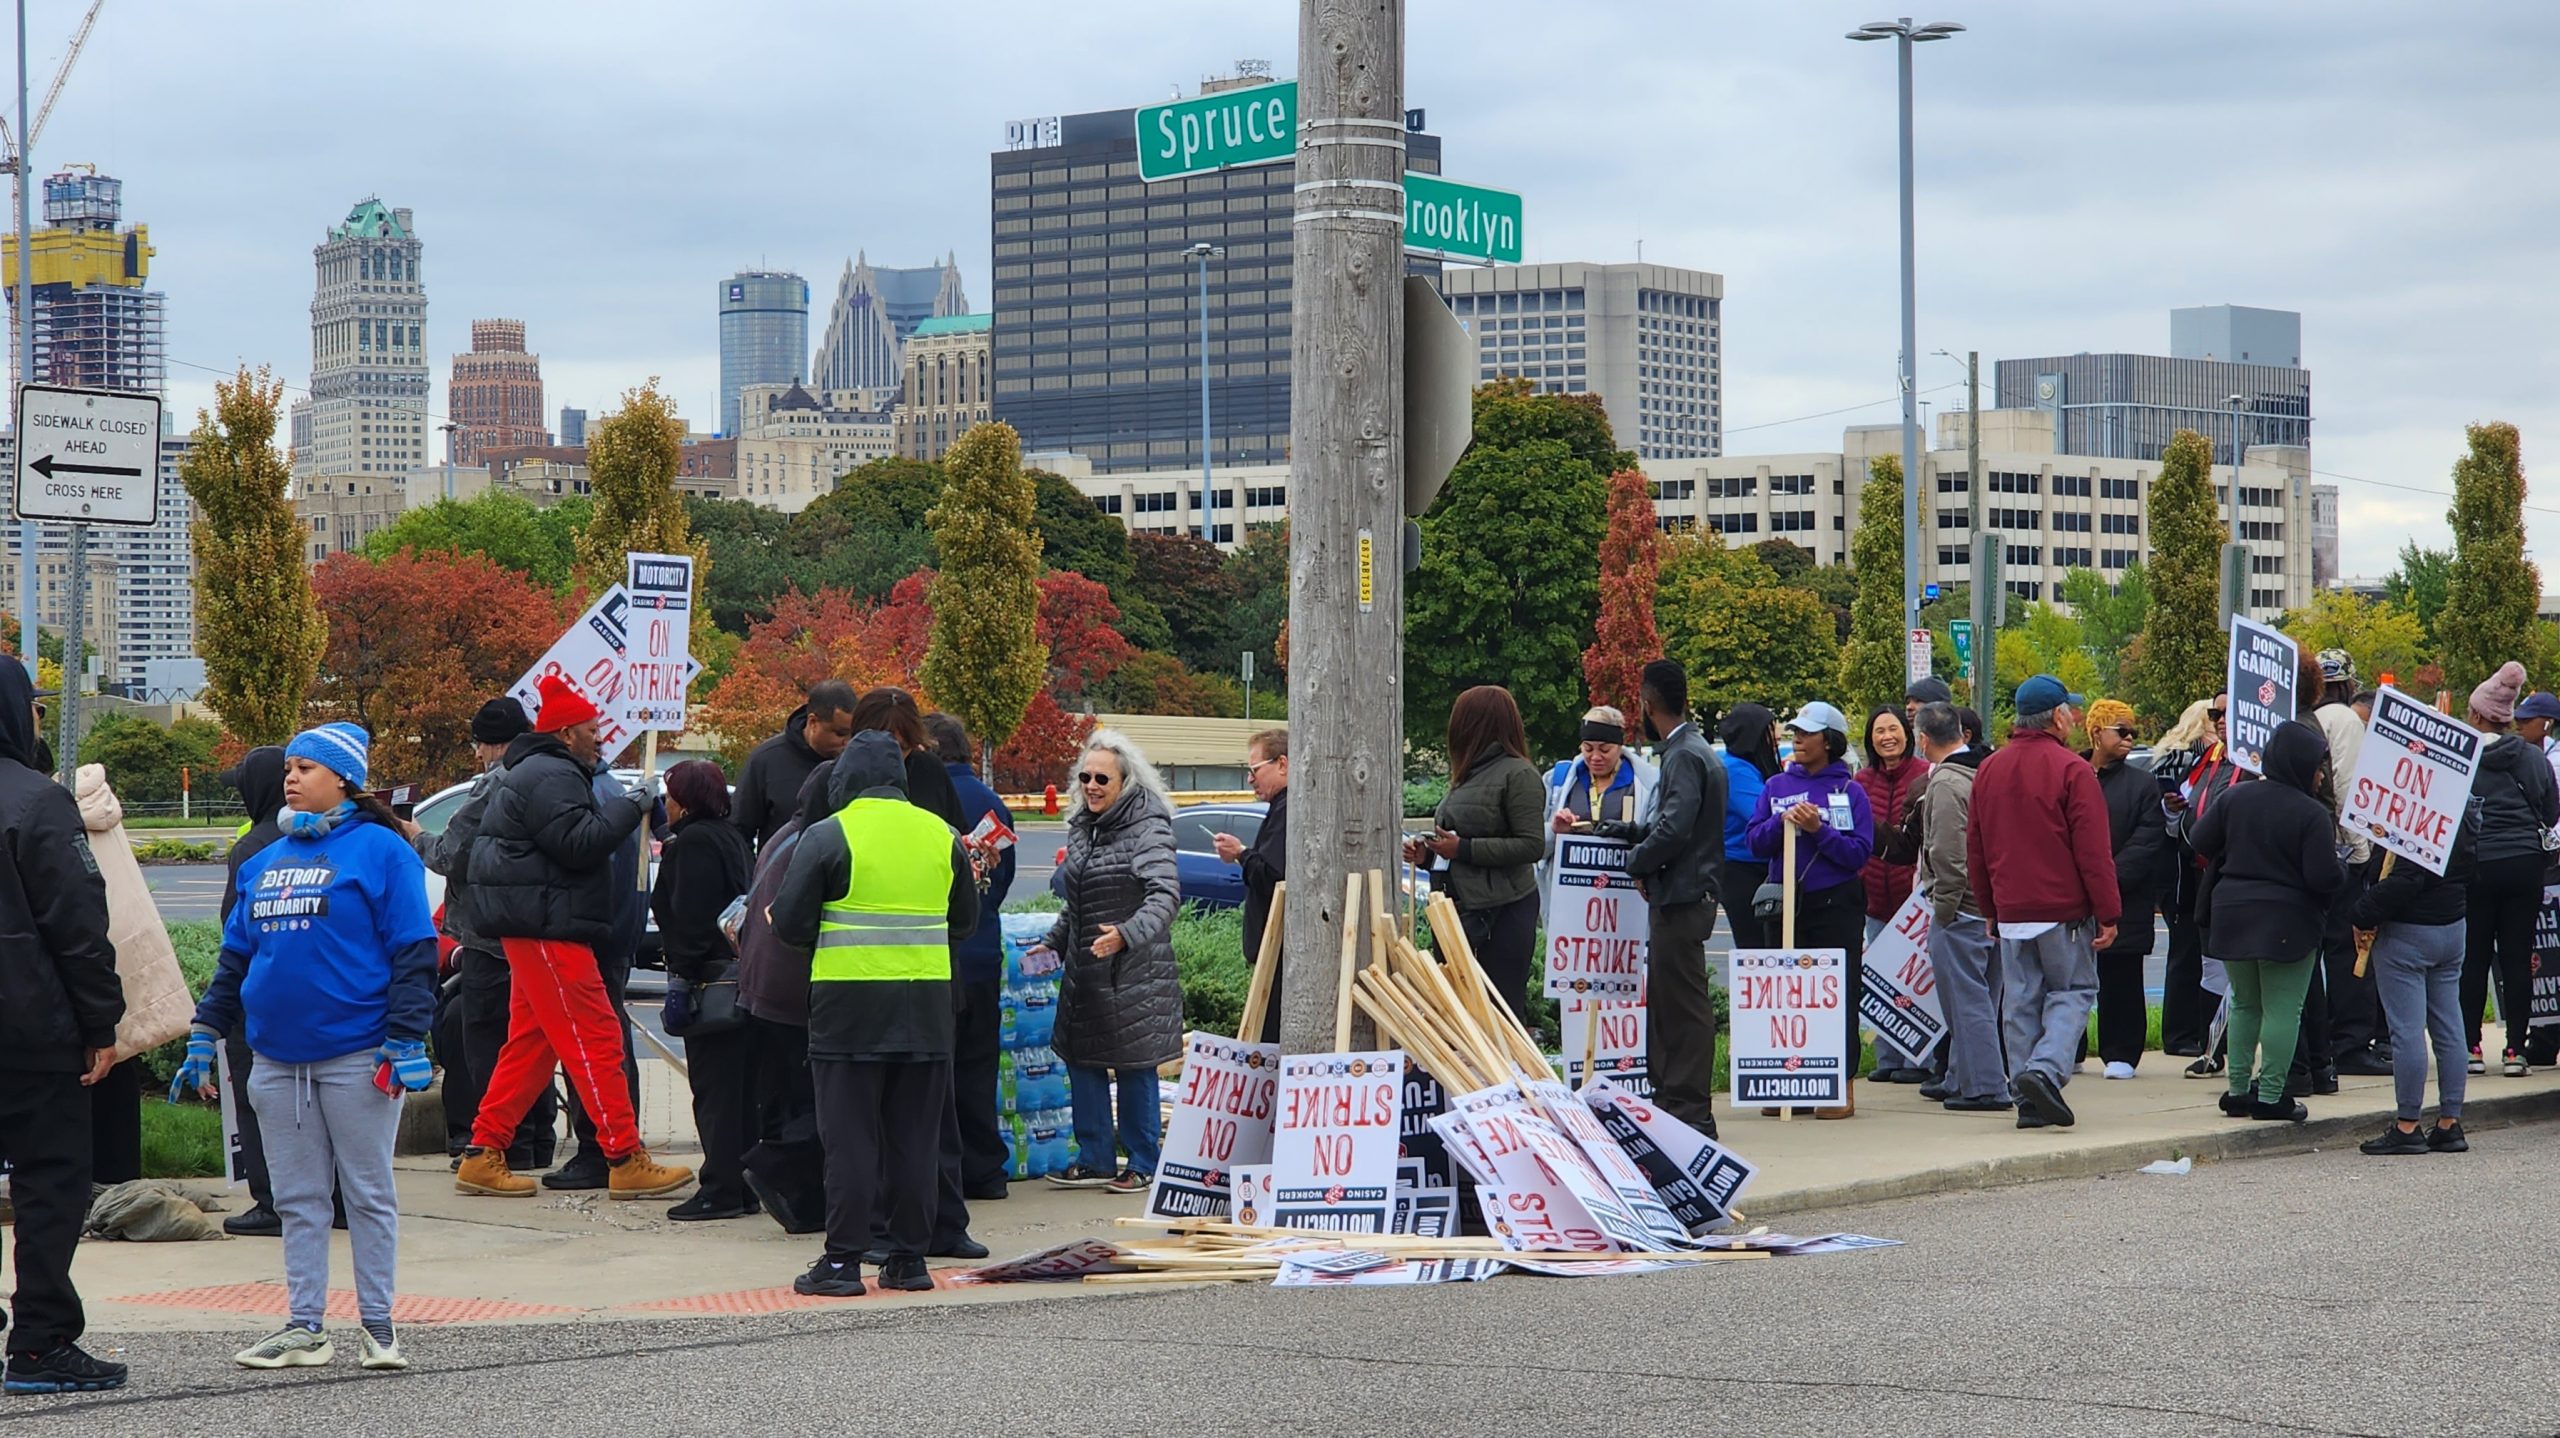 Workers distribute picket signs at the corner of Spruce St. and Brooklyn St. in Detroit.